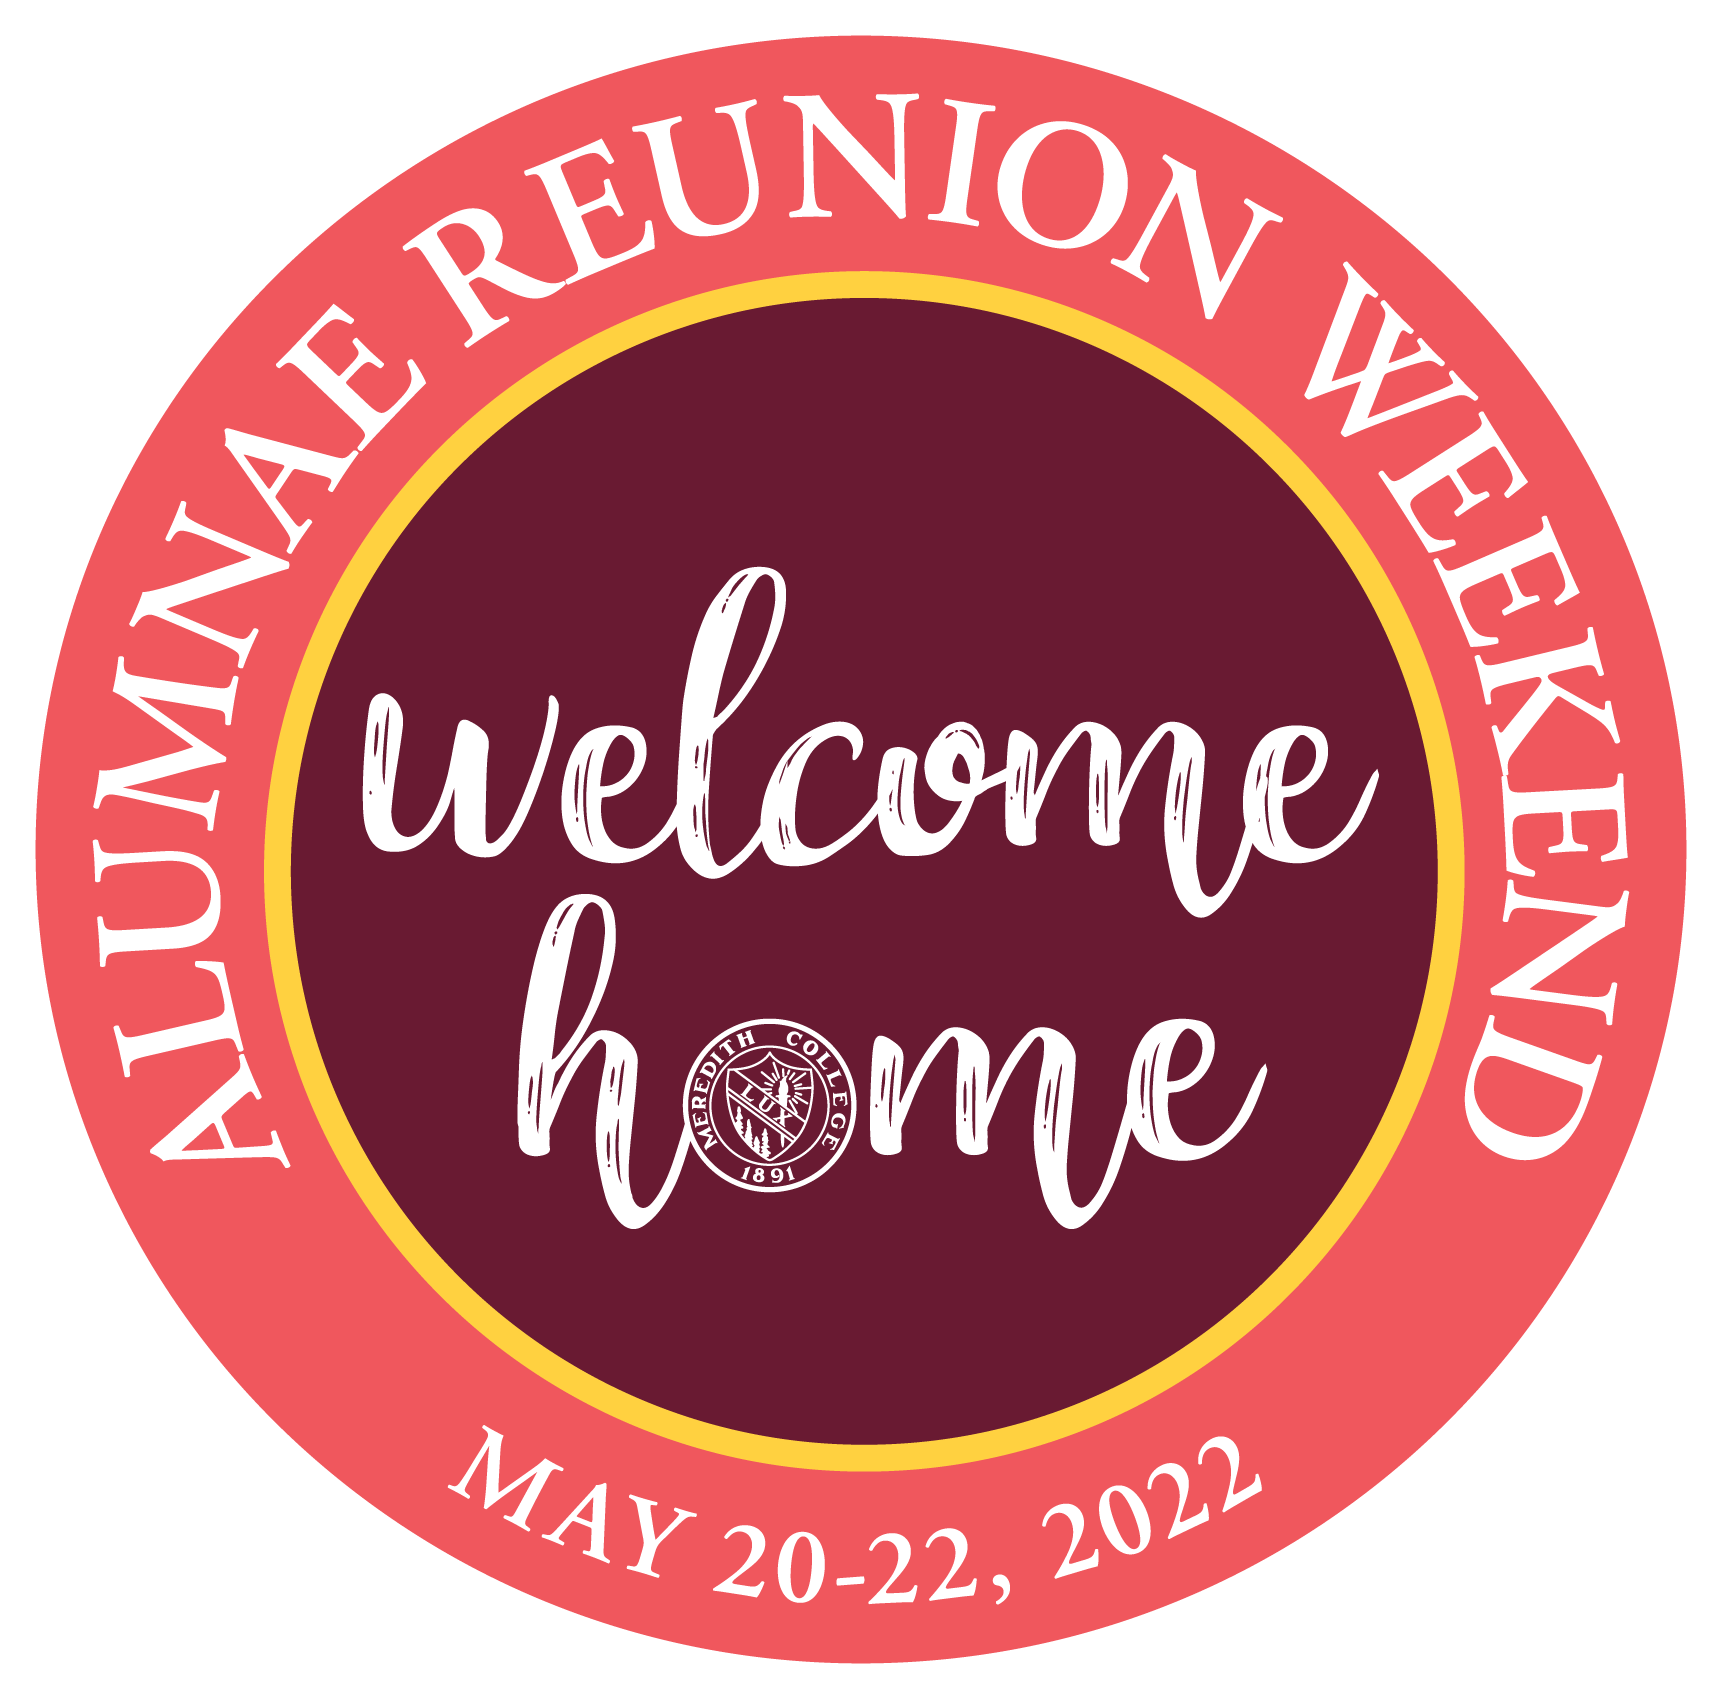 A logo for the Alumnae Reunion Weekend that says 